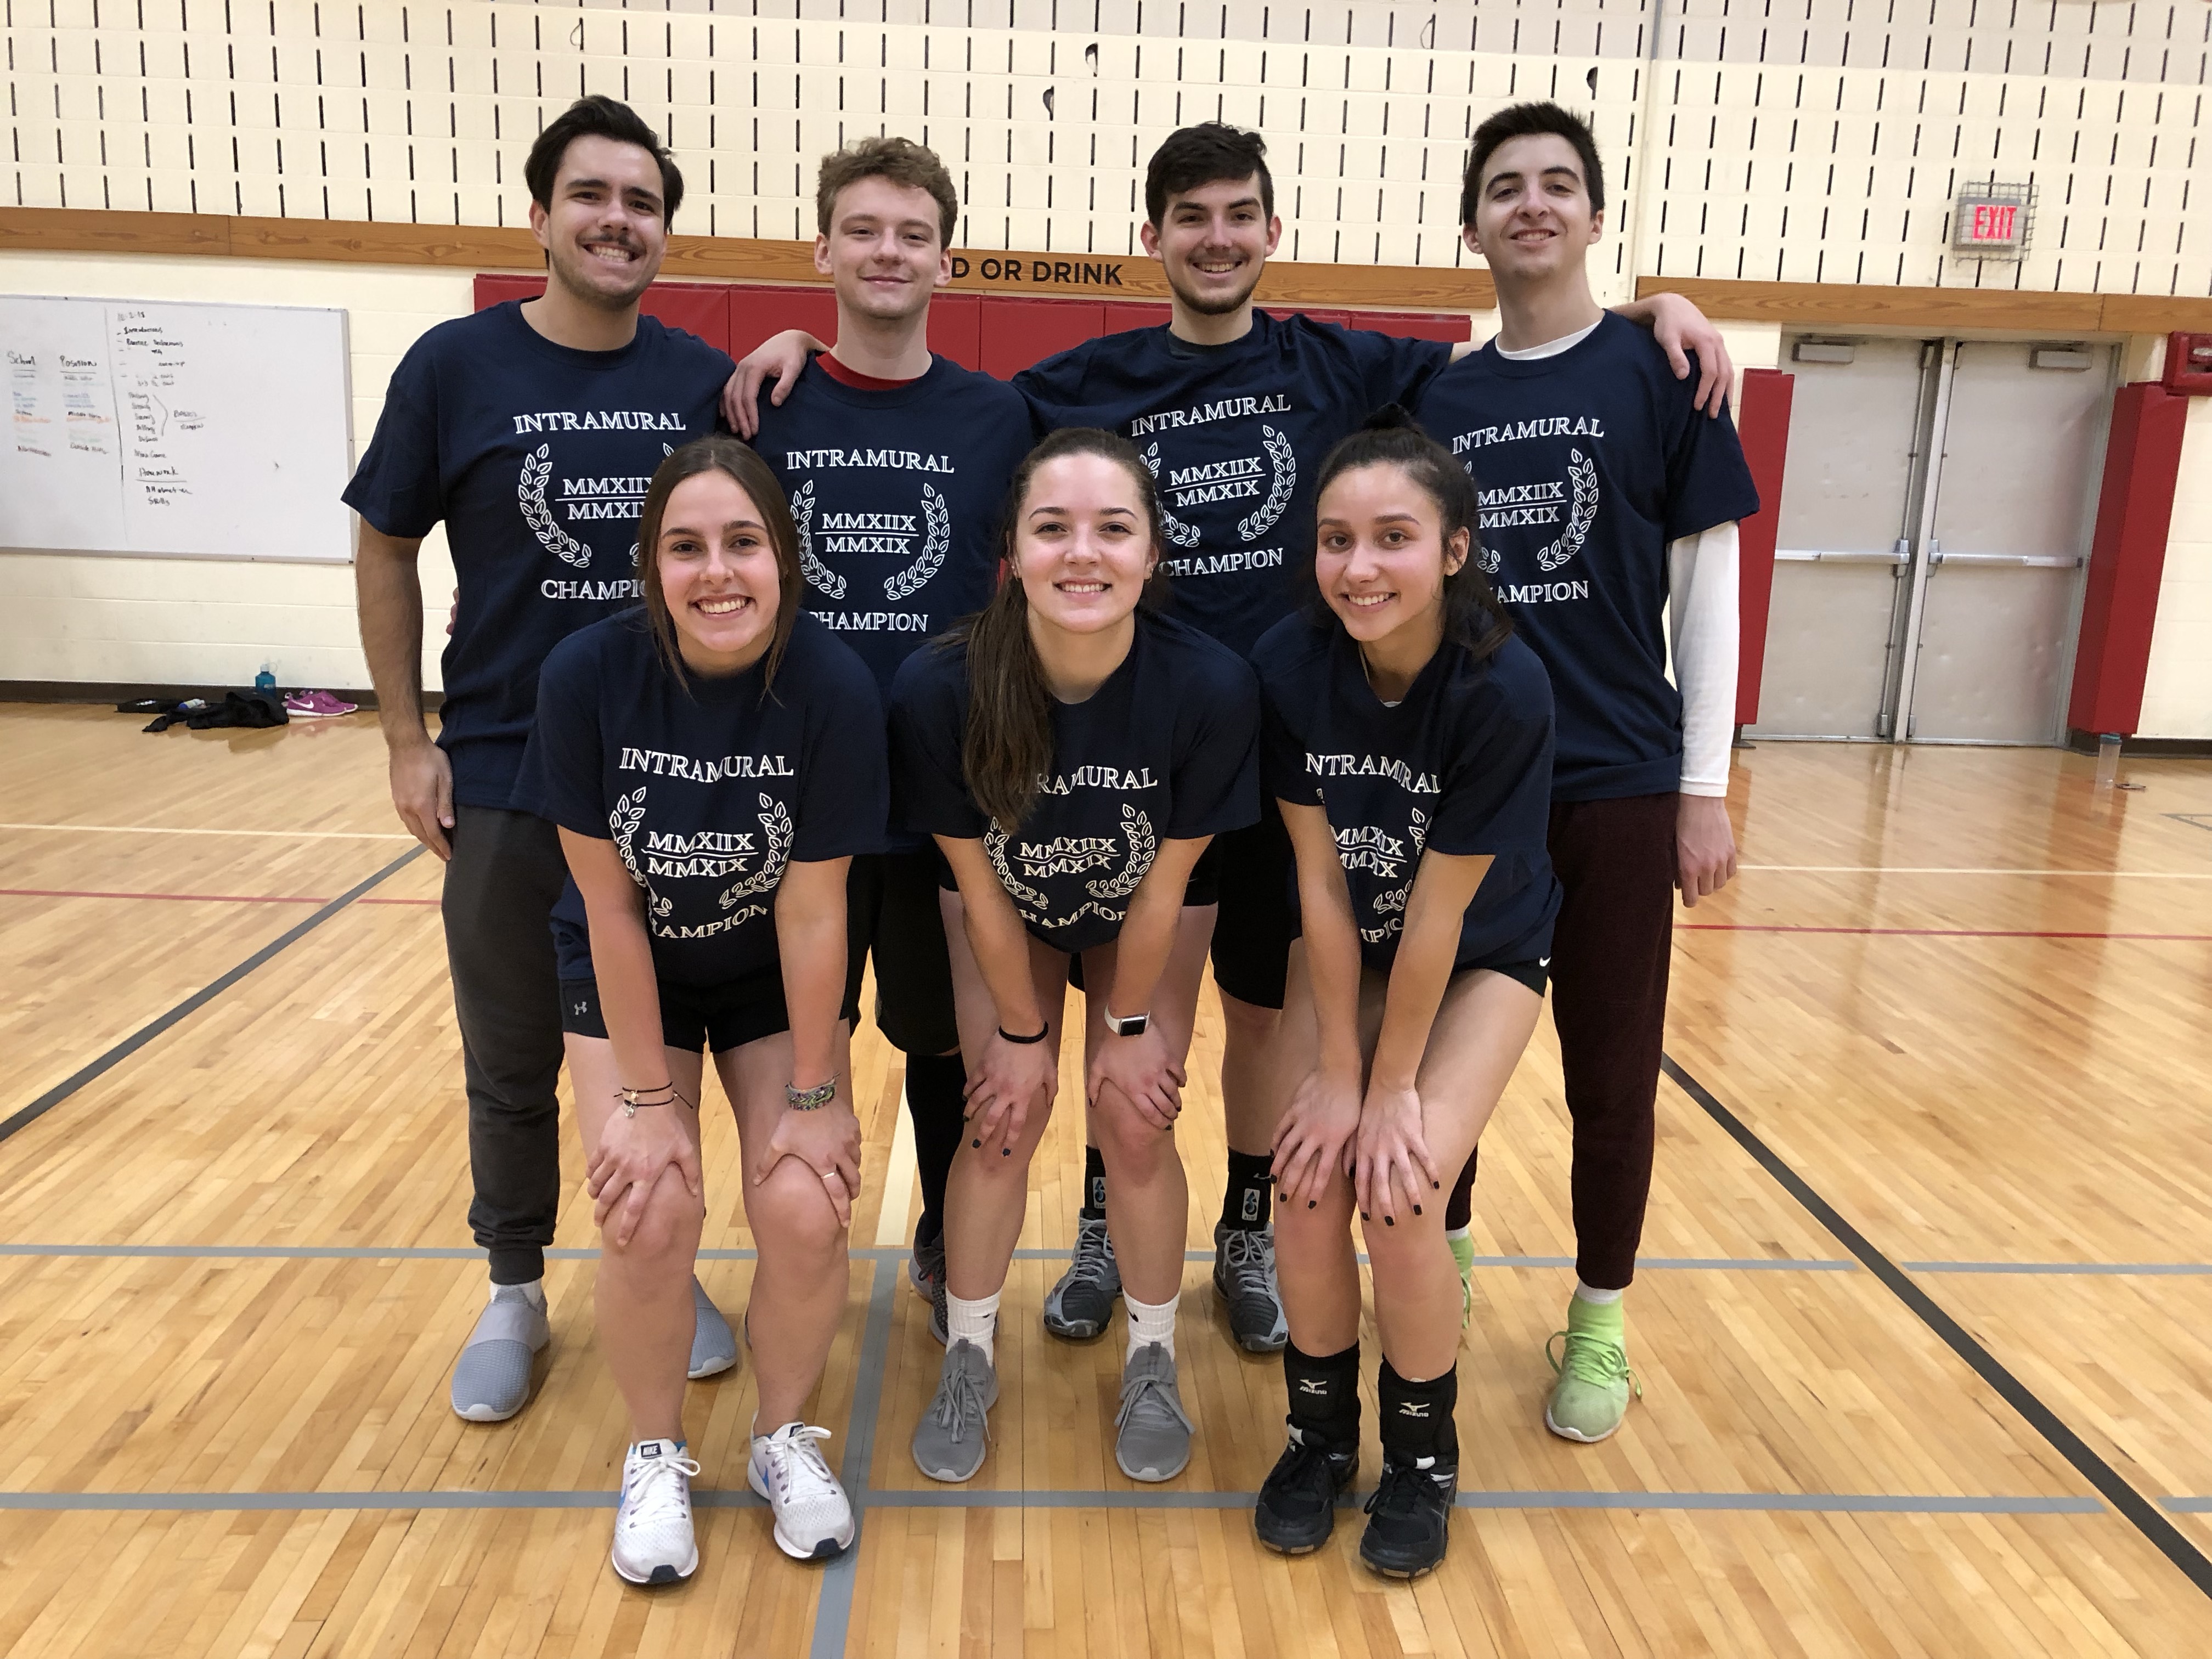 Indoor Co-Rec Volleyball champions team poses in front of the volleyball net in their Intramural Champions shirts.